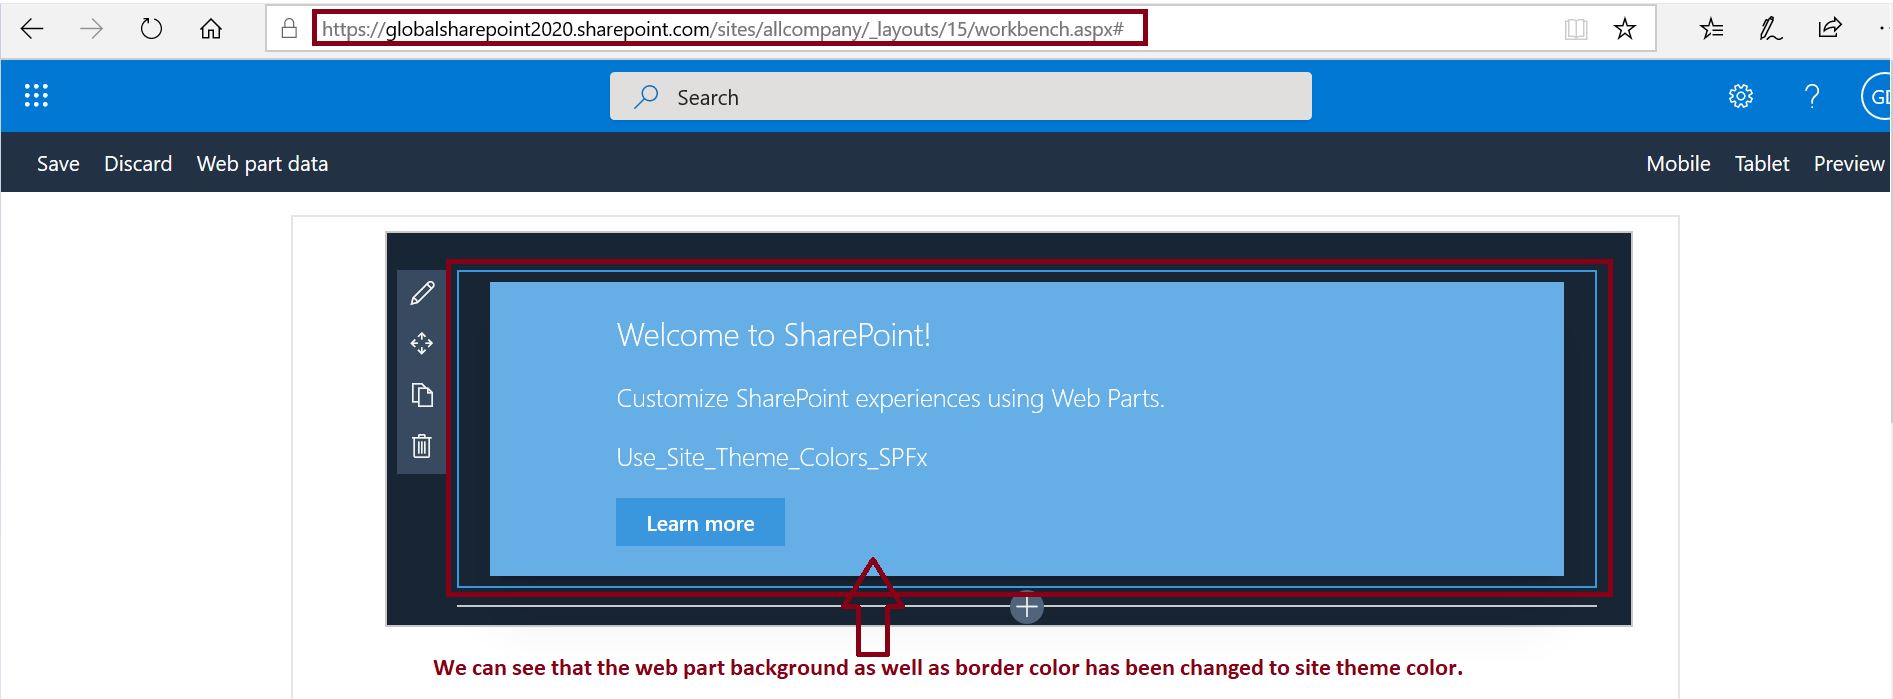 SharePoint theme colors (SPFx theme colors), verification - web part background color has been changed to site theme color in SPFx